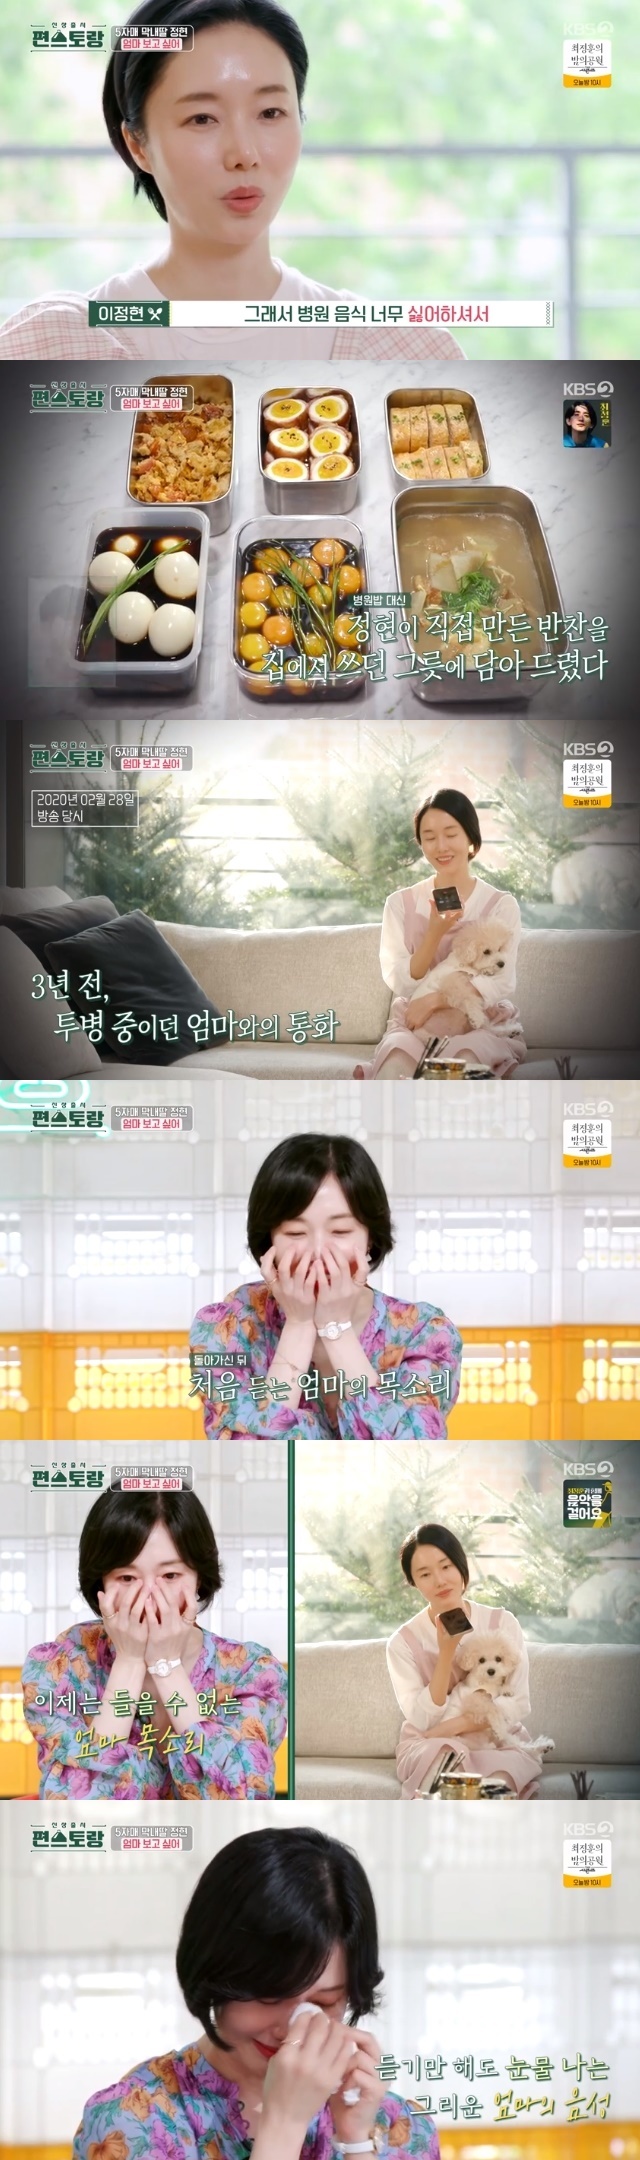 Actor Lee Jung-hyun showed Tears in the voice of Mother.In the 184th episode of KBS 2TVs entertainment show Stars Top Recipe at Fun-Staurant (hereinafter referred to as Stars Top Recipe at Fun-Staurant), which aired on July 14, Lee Jung-hyun expressed his longing for his mother.Lee Jung-hyun, who was preparing to soak Husband and water kimchi on the day, suddenly recalled Mother, saying, Mother has soaked kimchi at this point.Lee Jung-hyun said, Mother gave me breakfast, lunch, dinner, and dinner in 9 and 12 concubines. I always watched cooking and naturally liked cooking.I lived with my mother until my marriage, and I spent the longest time with my mother and I was always so angry that I slept next to her. Lee Jung-hyun said, My mother was battling for a long time when I filmed Stars Top Recipe at Fun-Staurant three years ago.When I got married, I found out that my mother was sick, so my mother stayed in the hospital for a long time. I hated hospital food so much that I took home-cooked meals and home-cooked dishes to the hospital and served them to my mother.In the actual Stars Top Recipe at Fun-Staurant, Lee Jung-hyun made a side dish for Mother at the time.